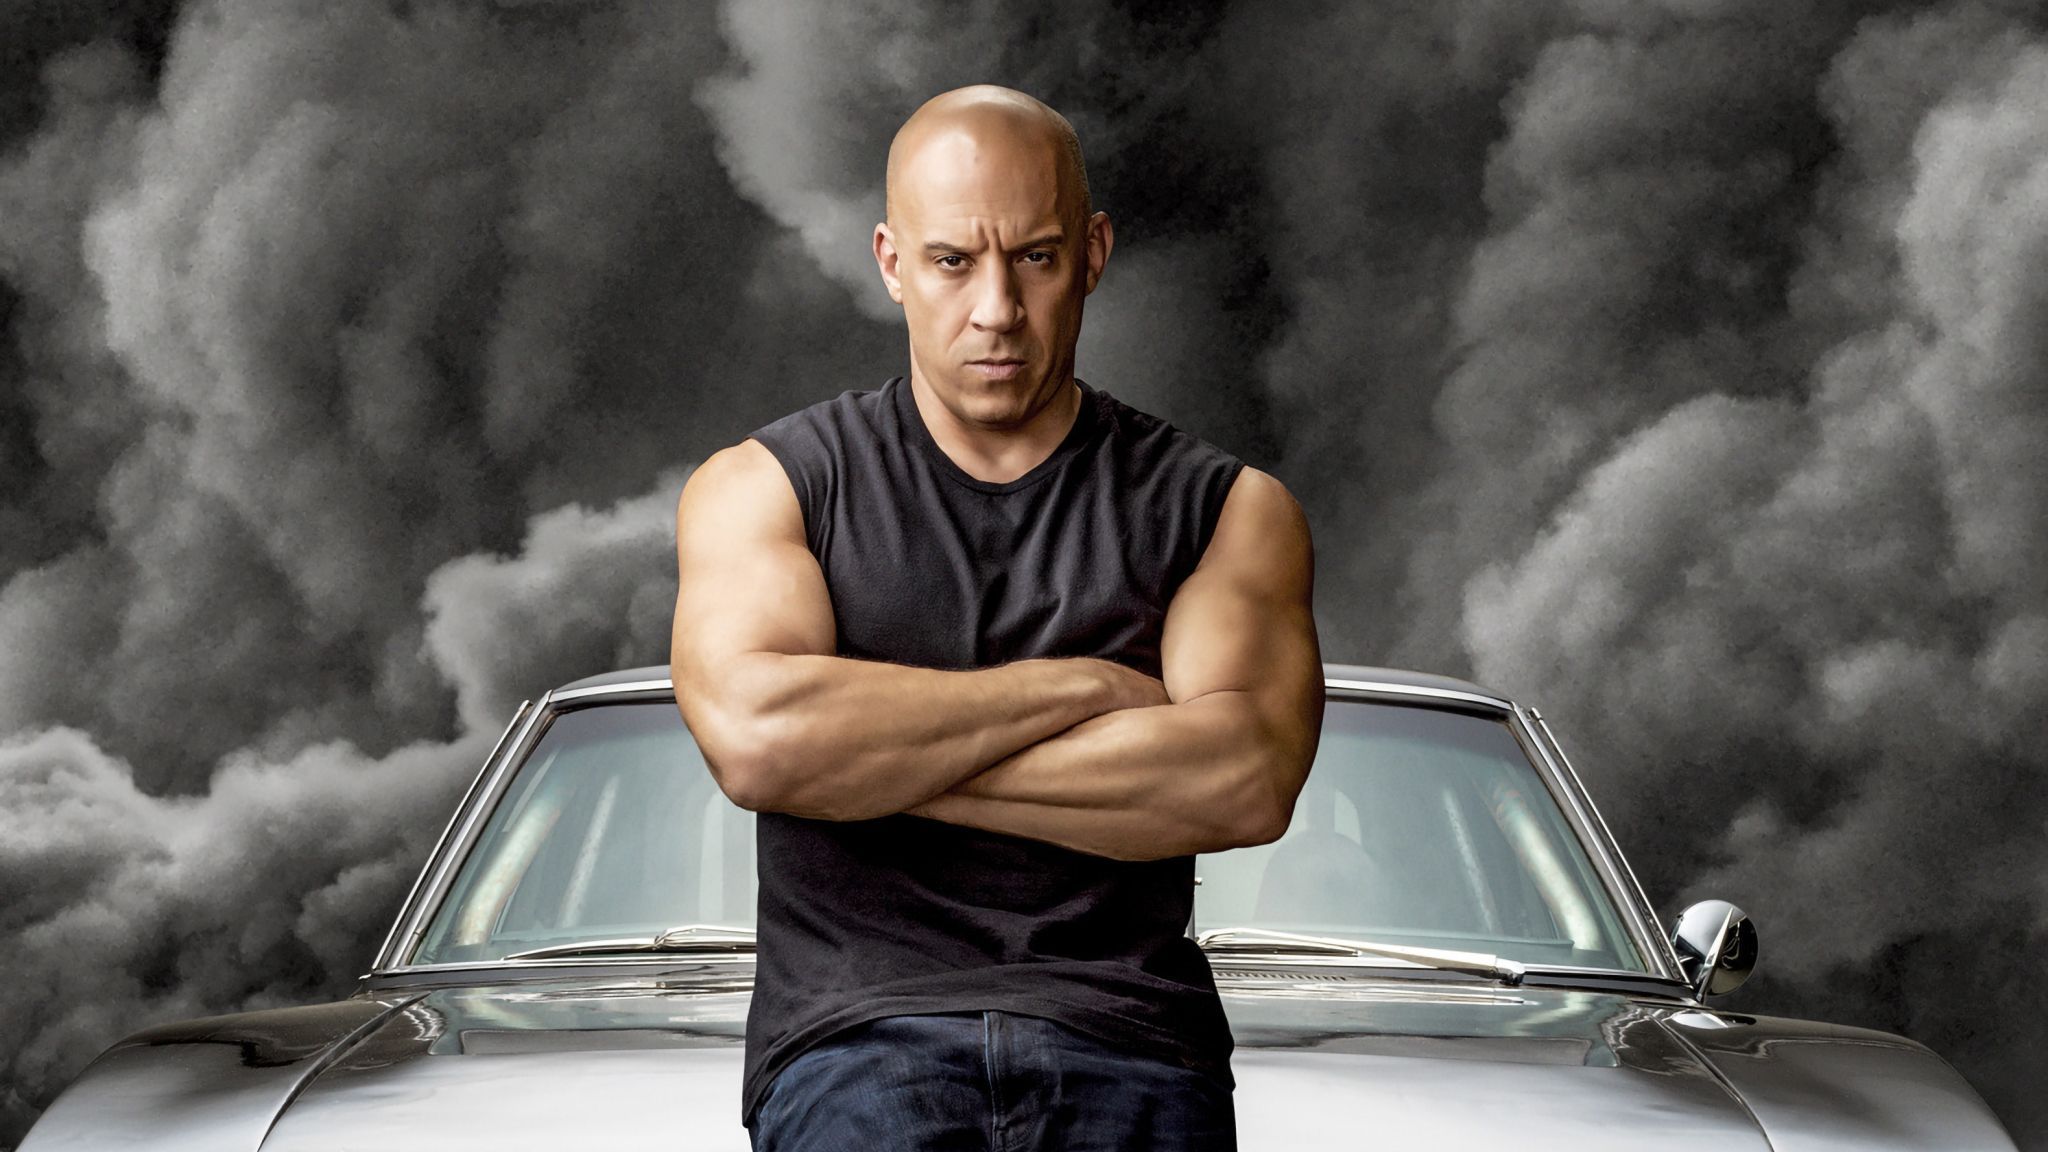 Fast & Furious 9 Wallpapers